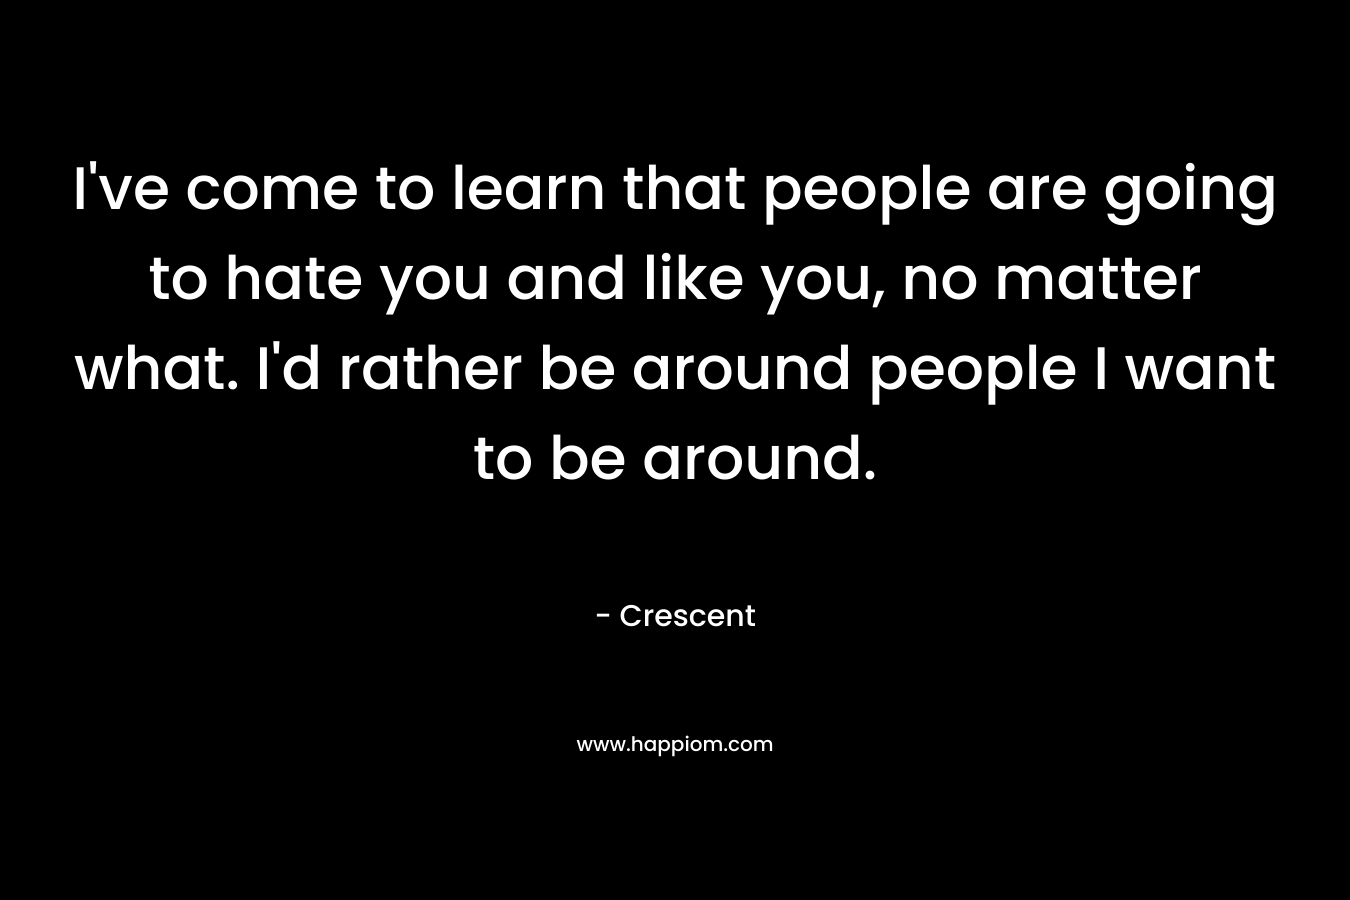 I’ve come to learn that people are going to hate you and like you, no matter what. I’d rather be around people I want to be around. – Crescent